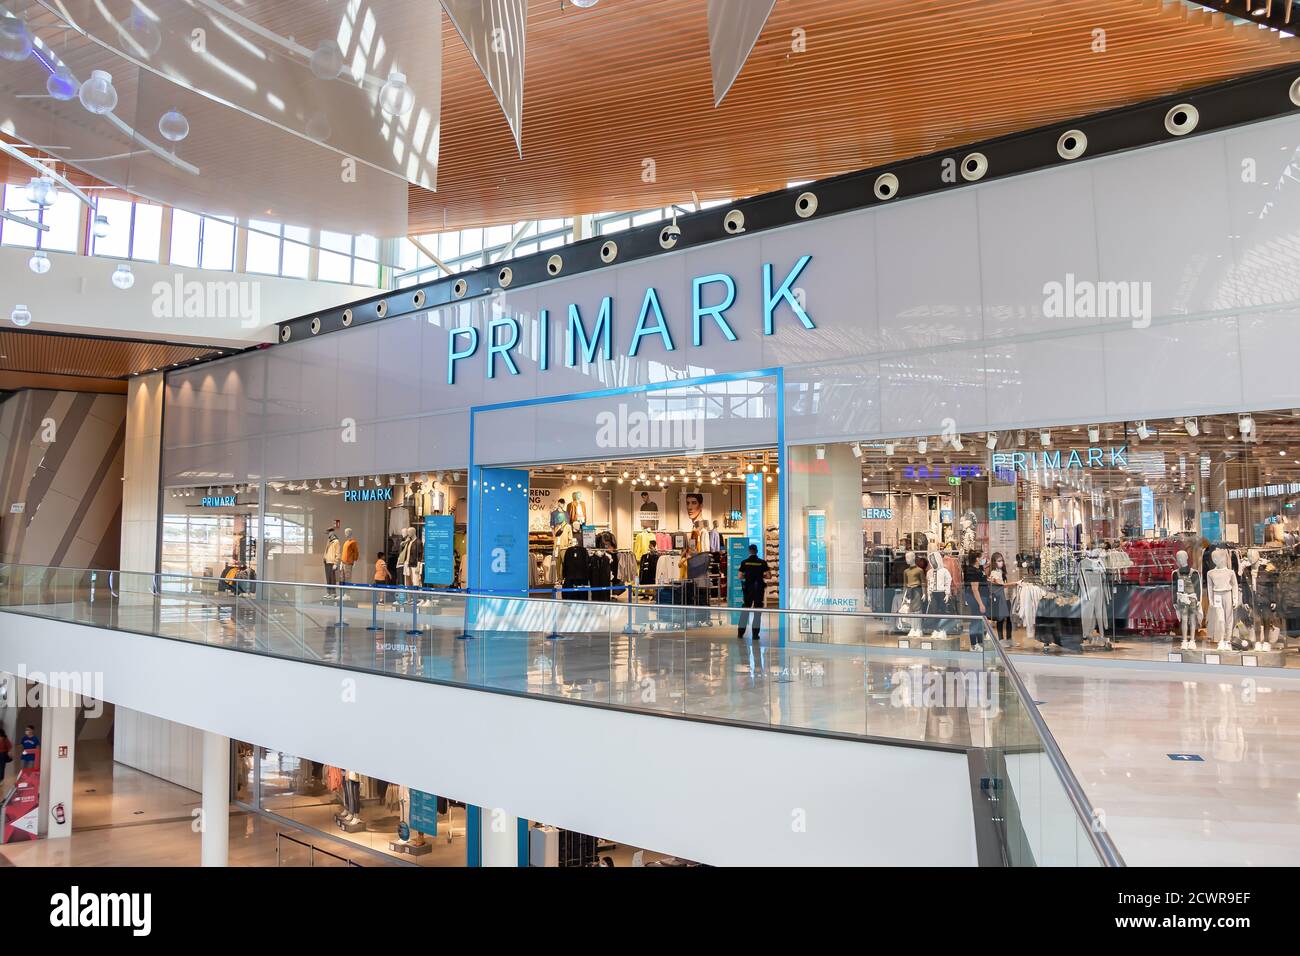 Seville, Spain - September 18, 2020: Primark Store in Lagoh shopping mall.  Offers a diverse range of products, baby and children's clothing, womenswea  Stock Photo - Alamy